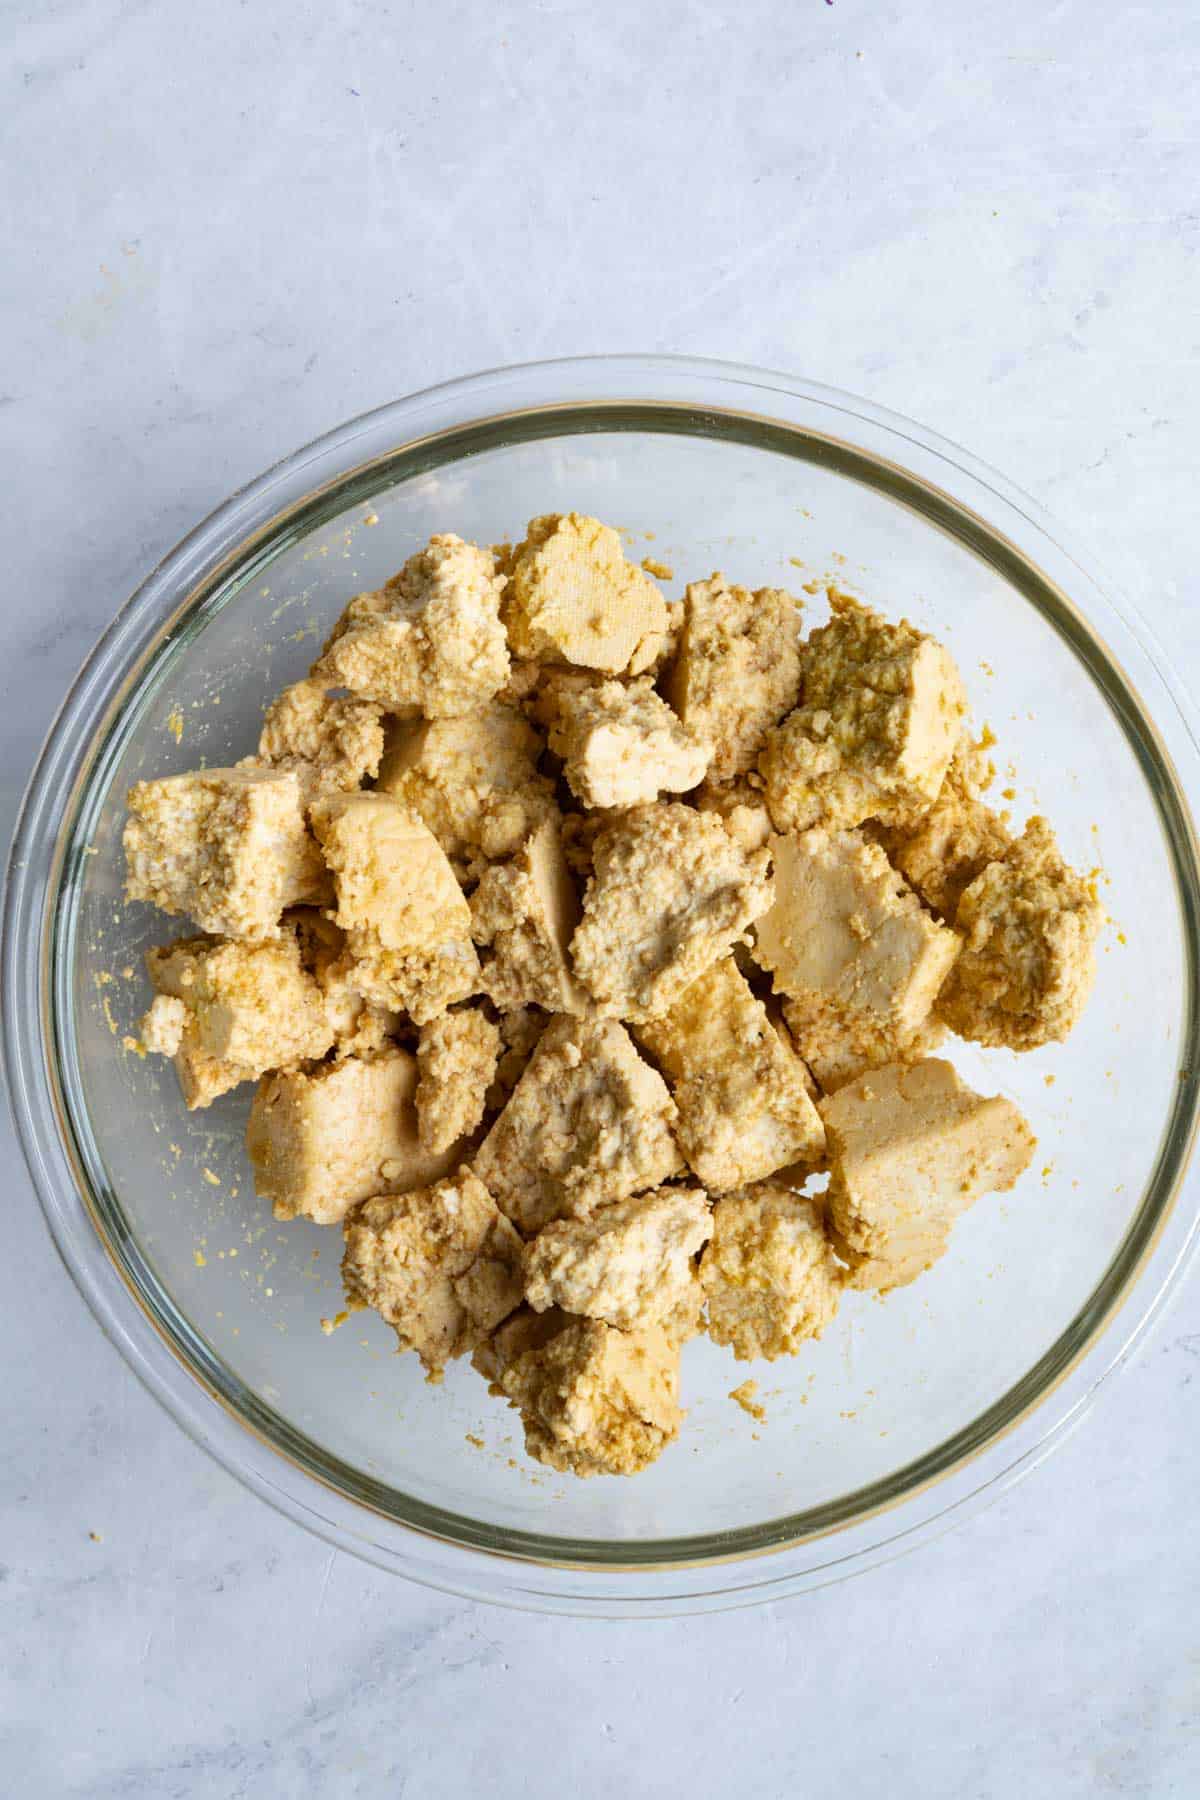 Chunks of tofu tossed in marinade in a glass bowl.